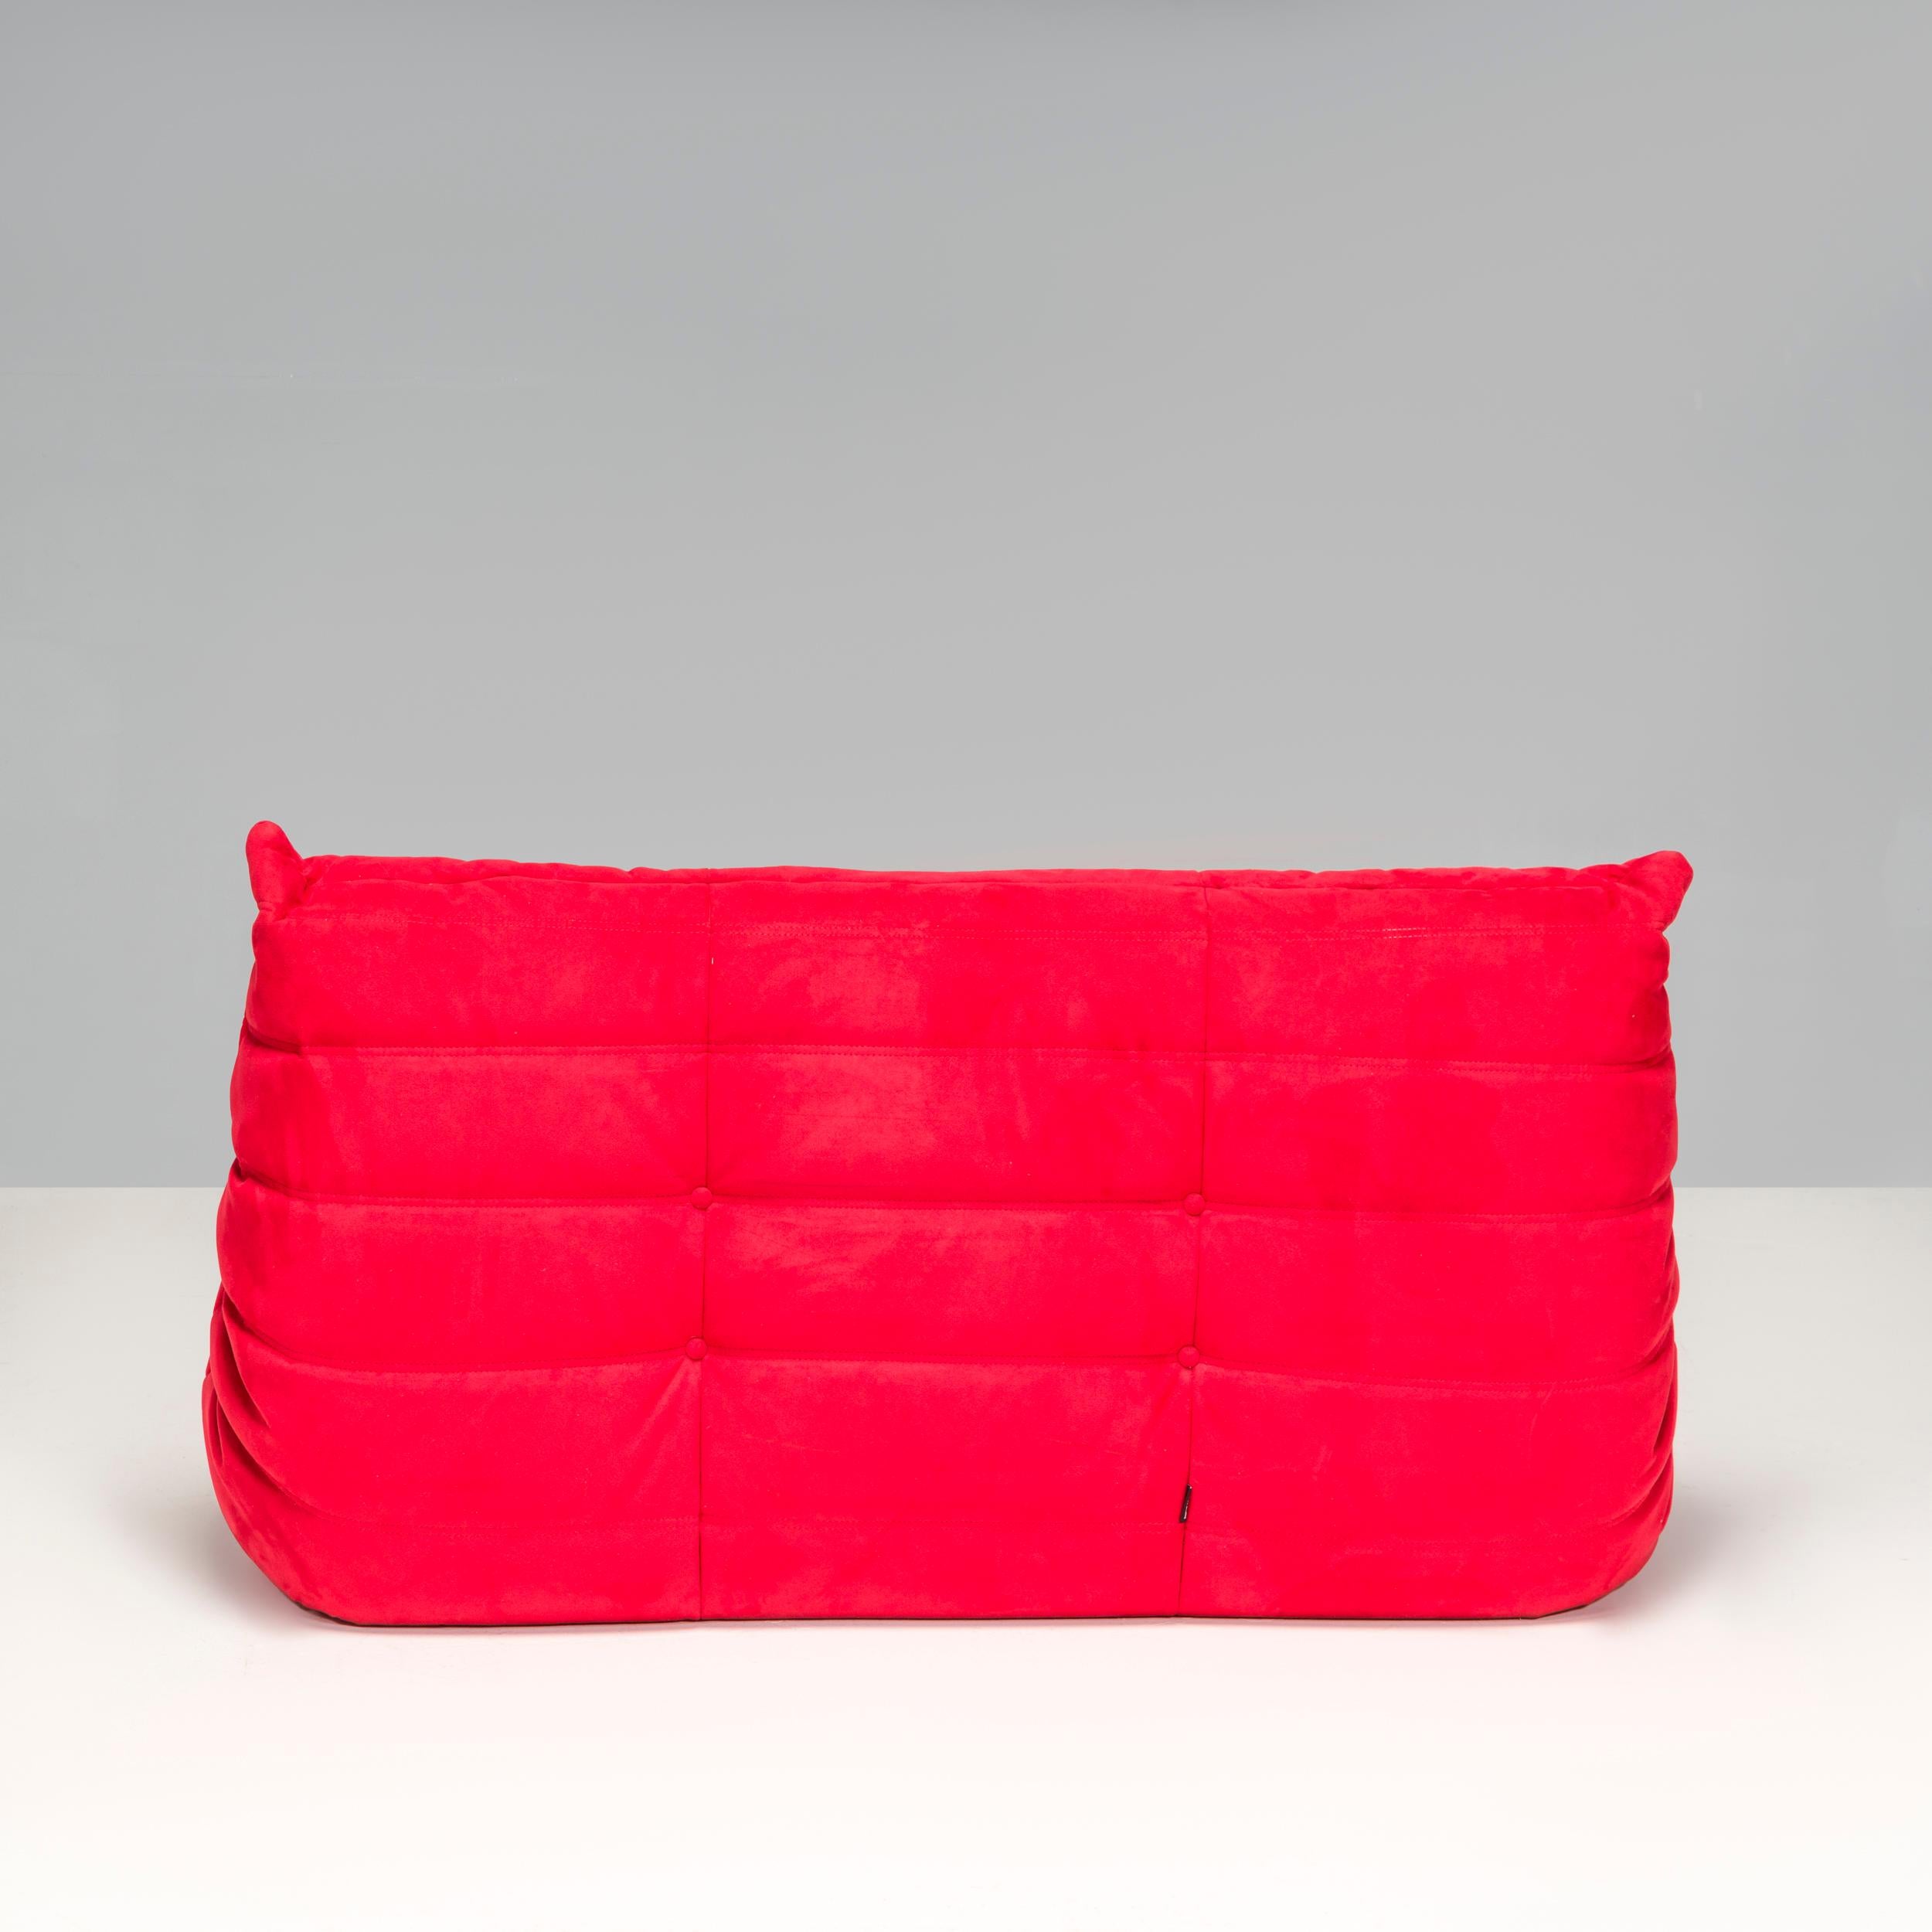 Contemporary Ligne Roset by Michel Ducaroy Togo Red Alcantara Sectional Sofa, Set of 3 For Sale